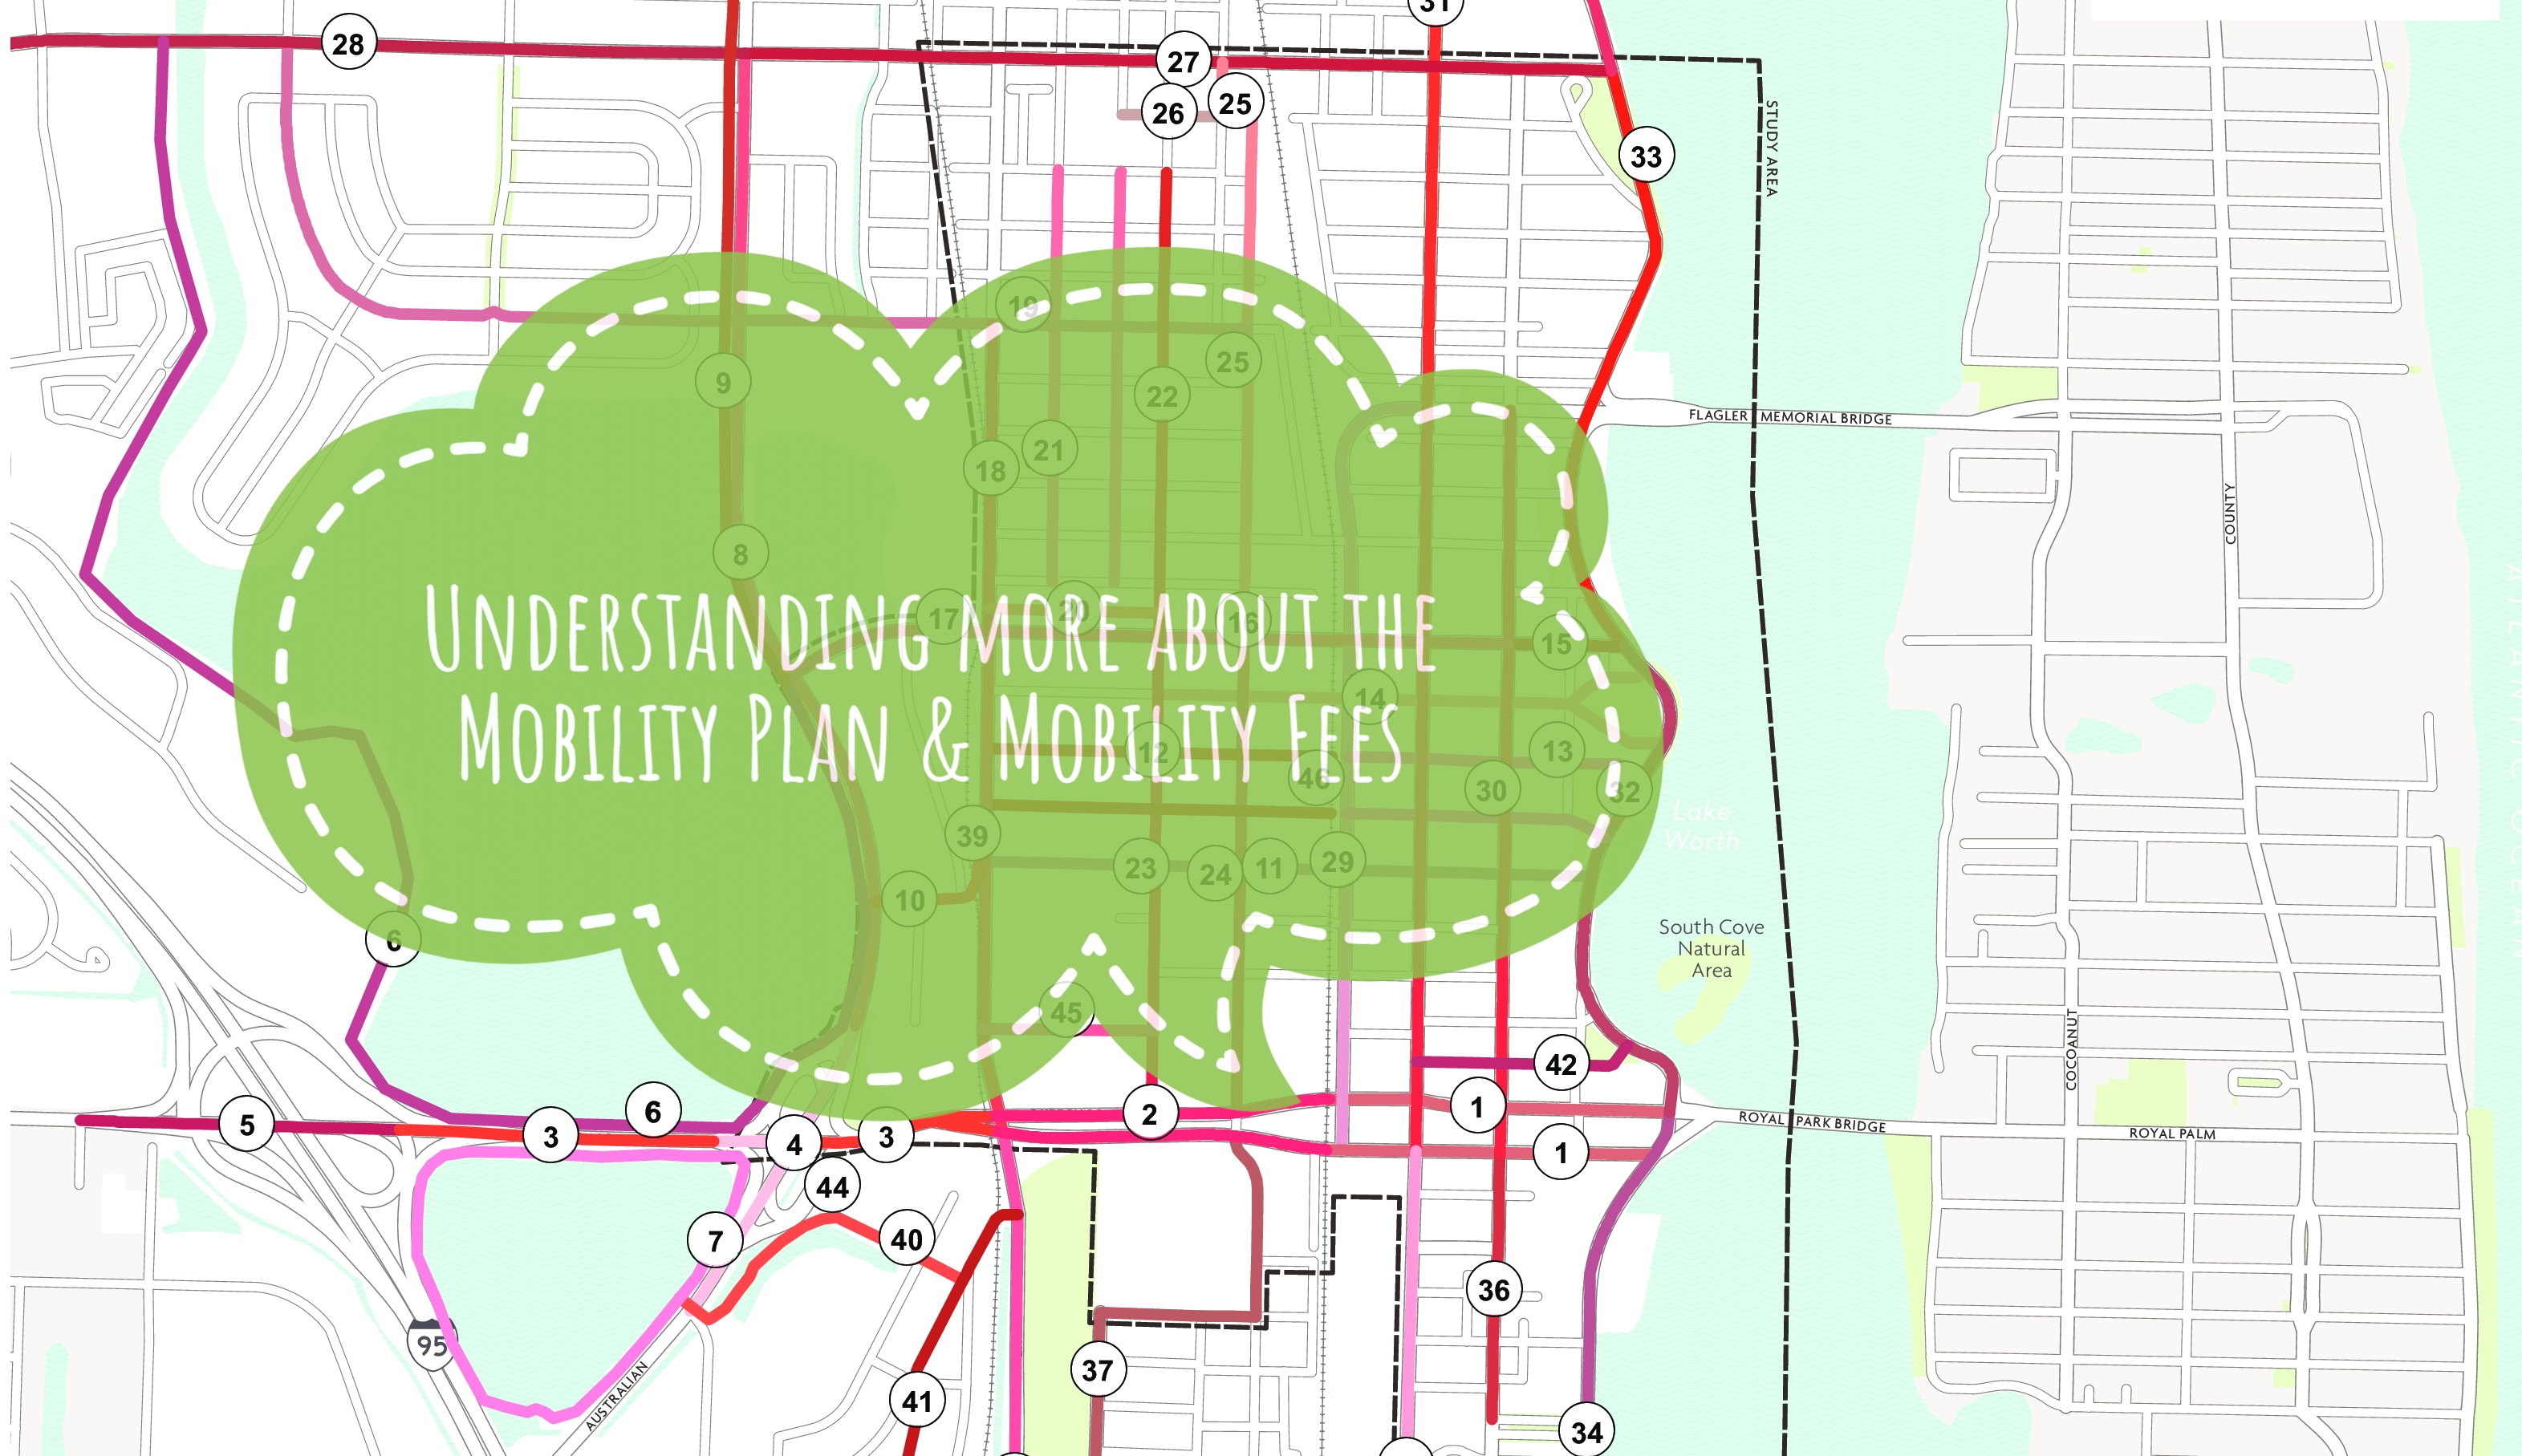 West Palm Beach Mobility Plan & Mobility Fees